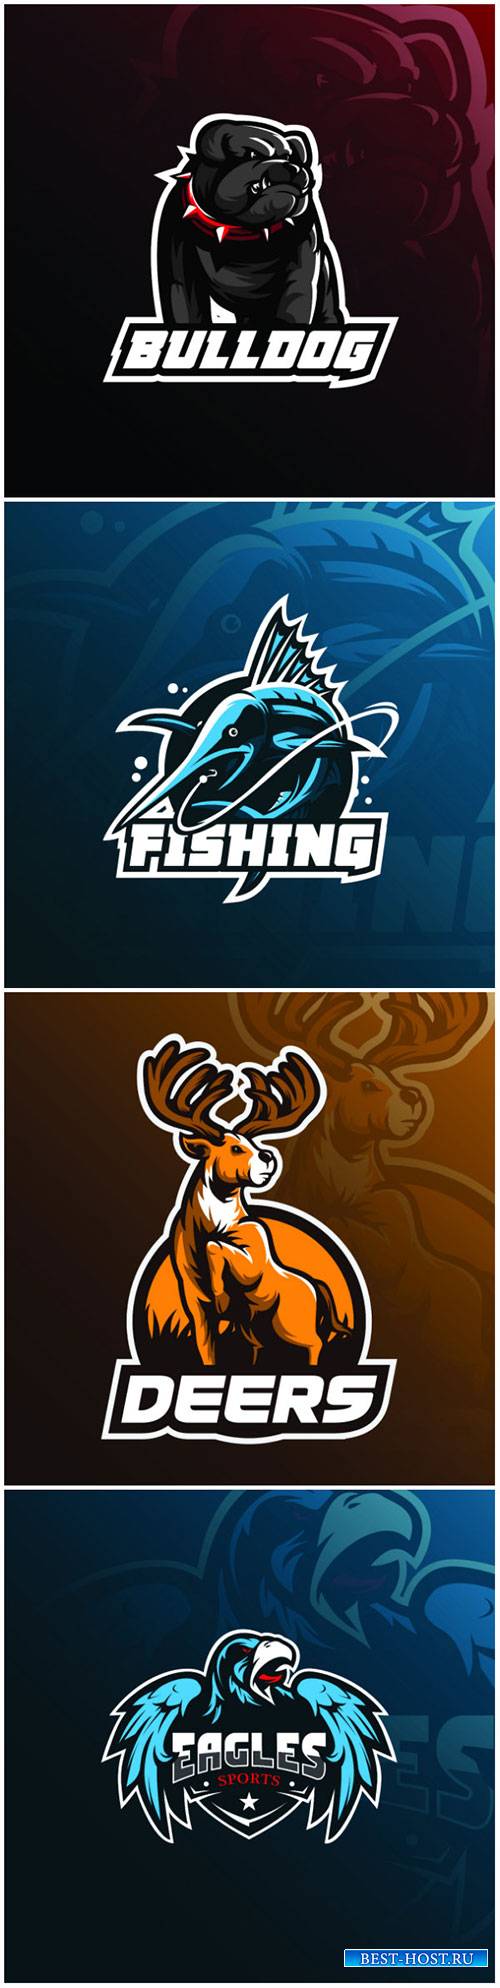 Mascot vector logo design with modern illustration concept style for badge, emblem and tshirt printing # 3